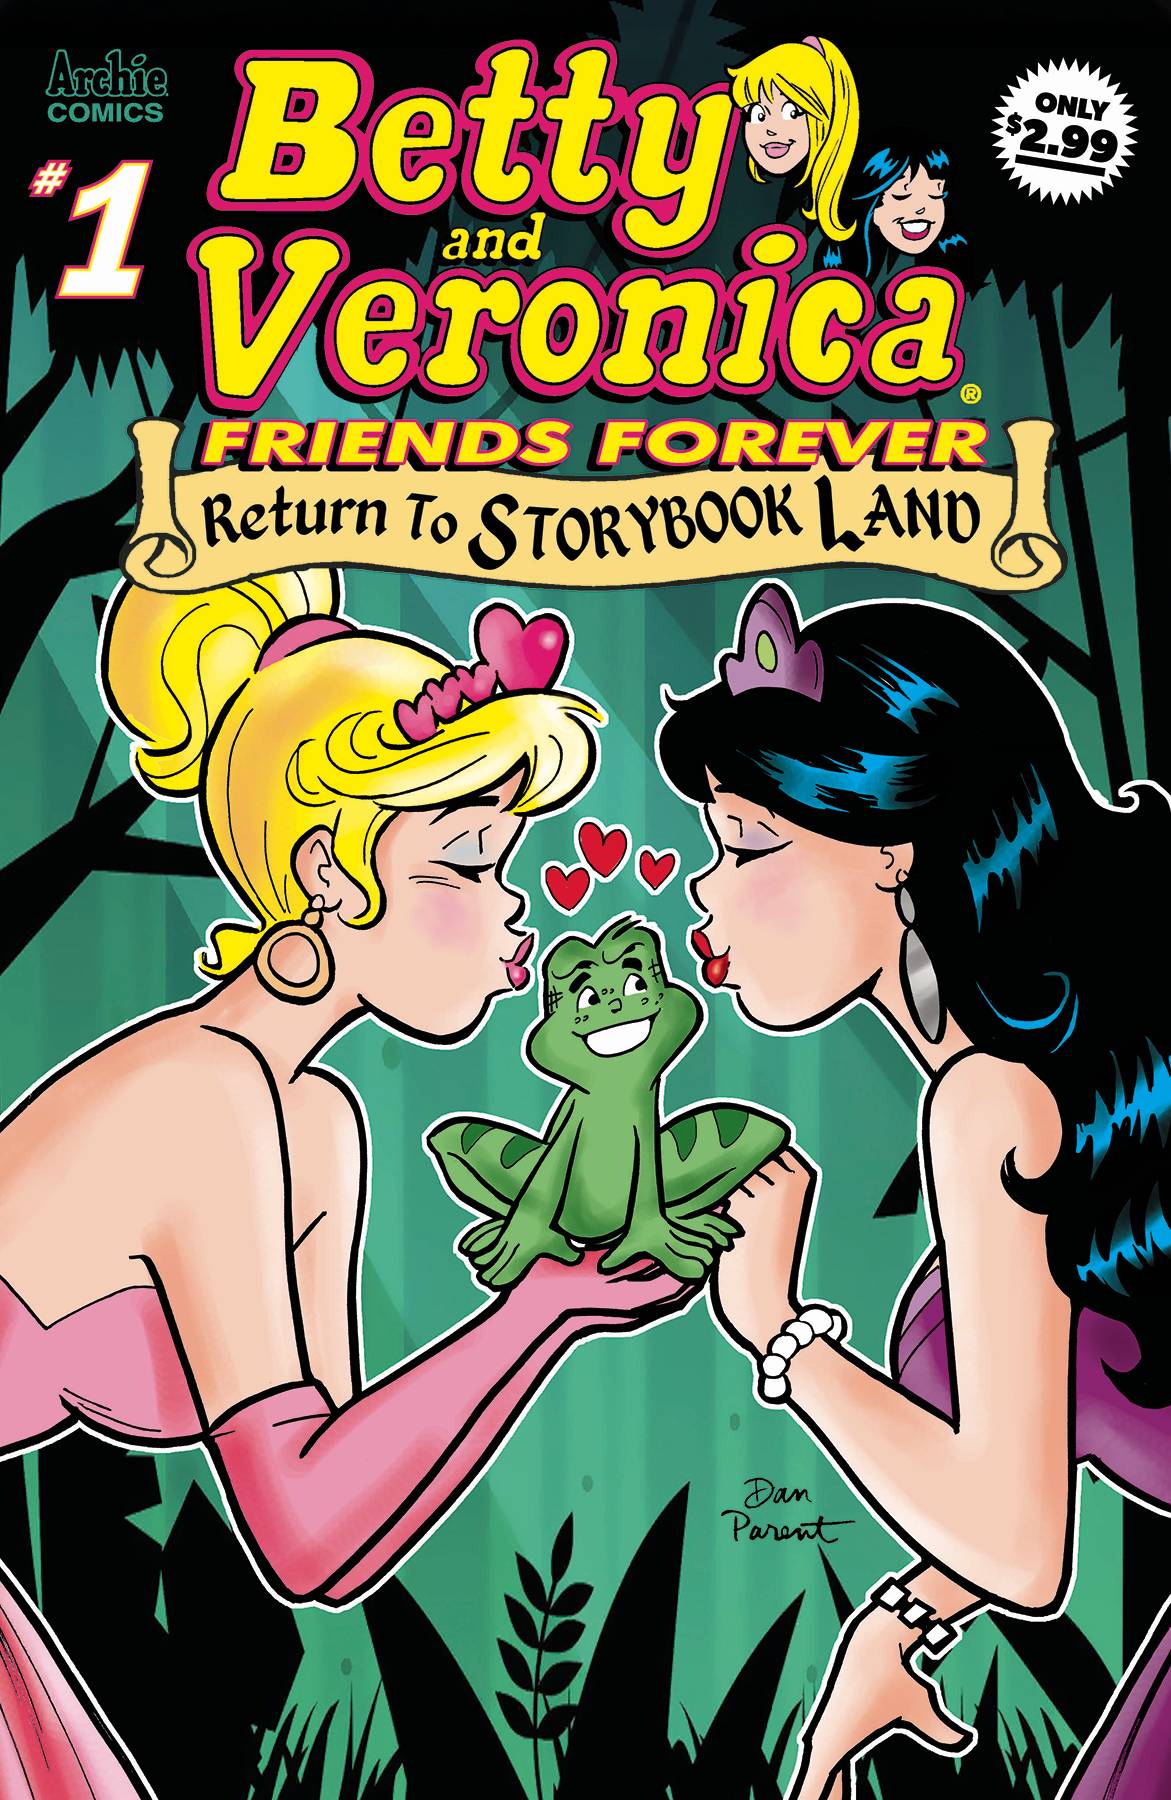 Betty & Veronica Friends Forever Volume 6 Back To Storybook Land #1